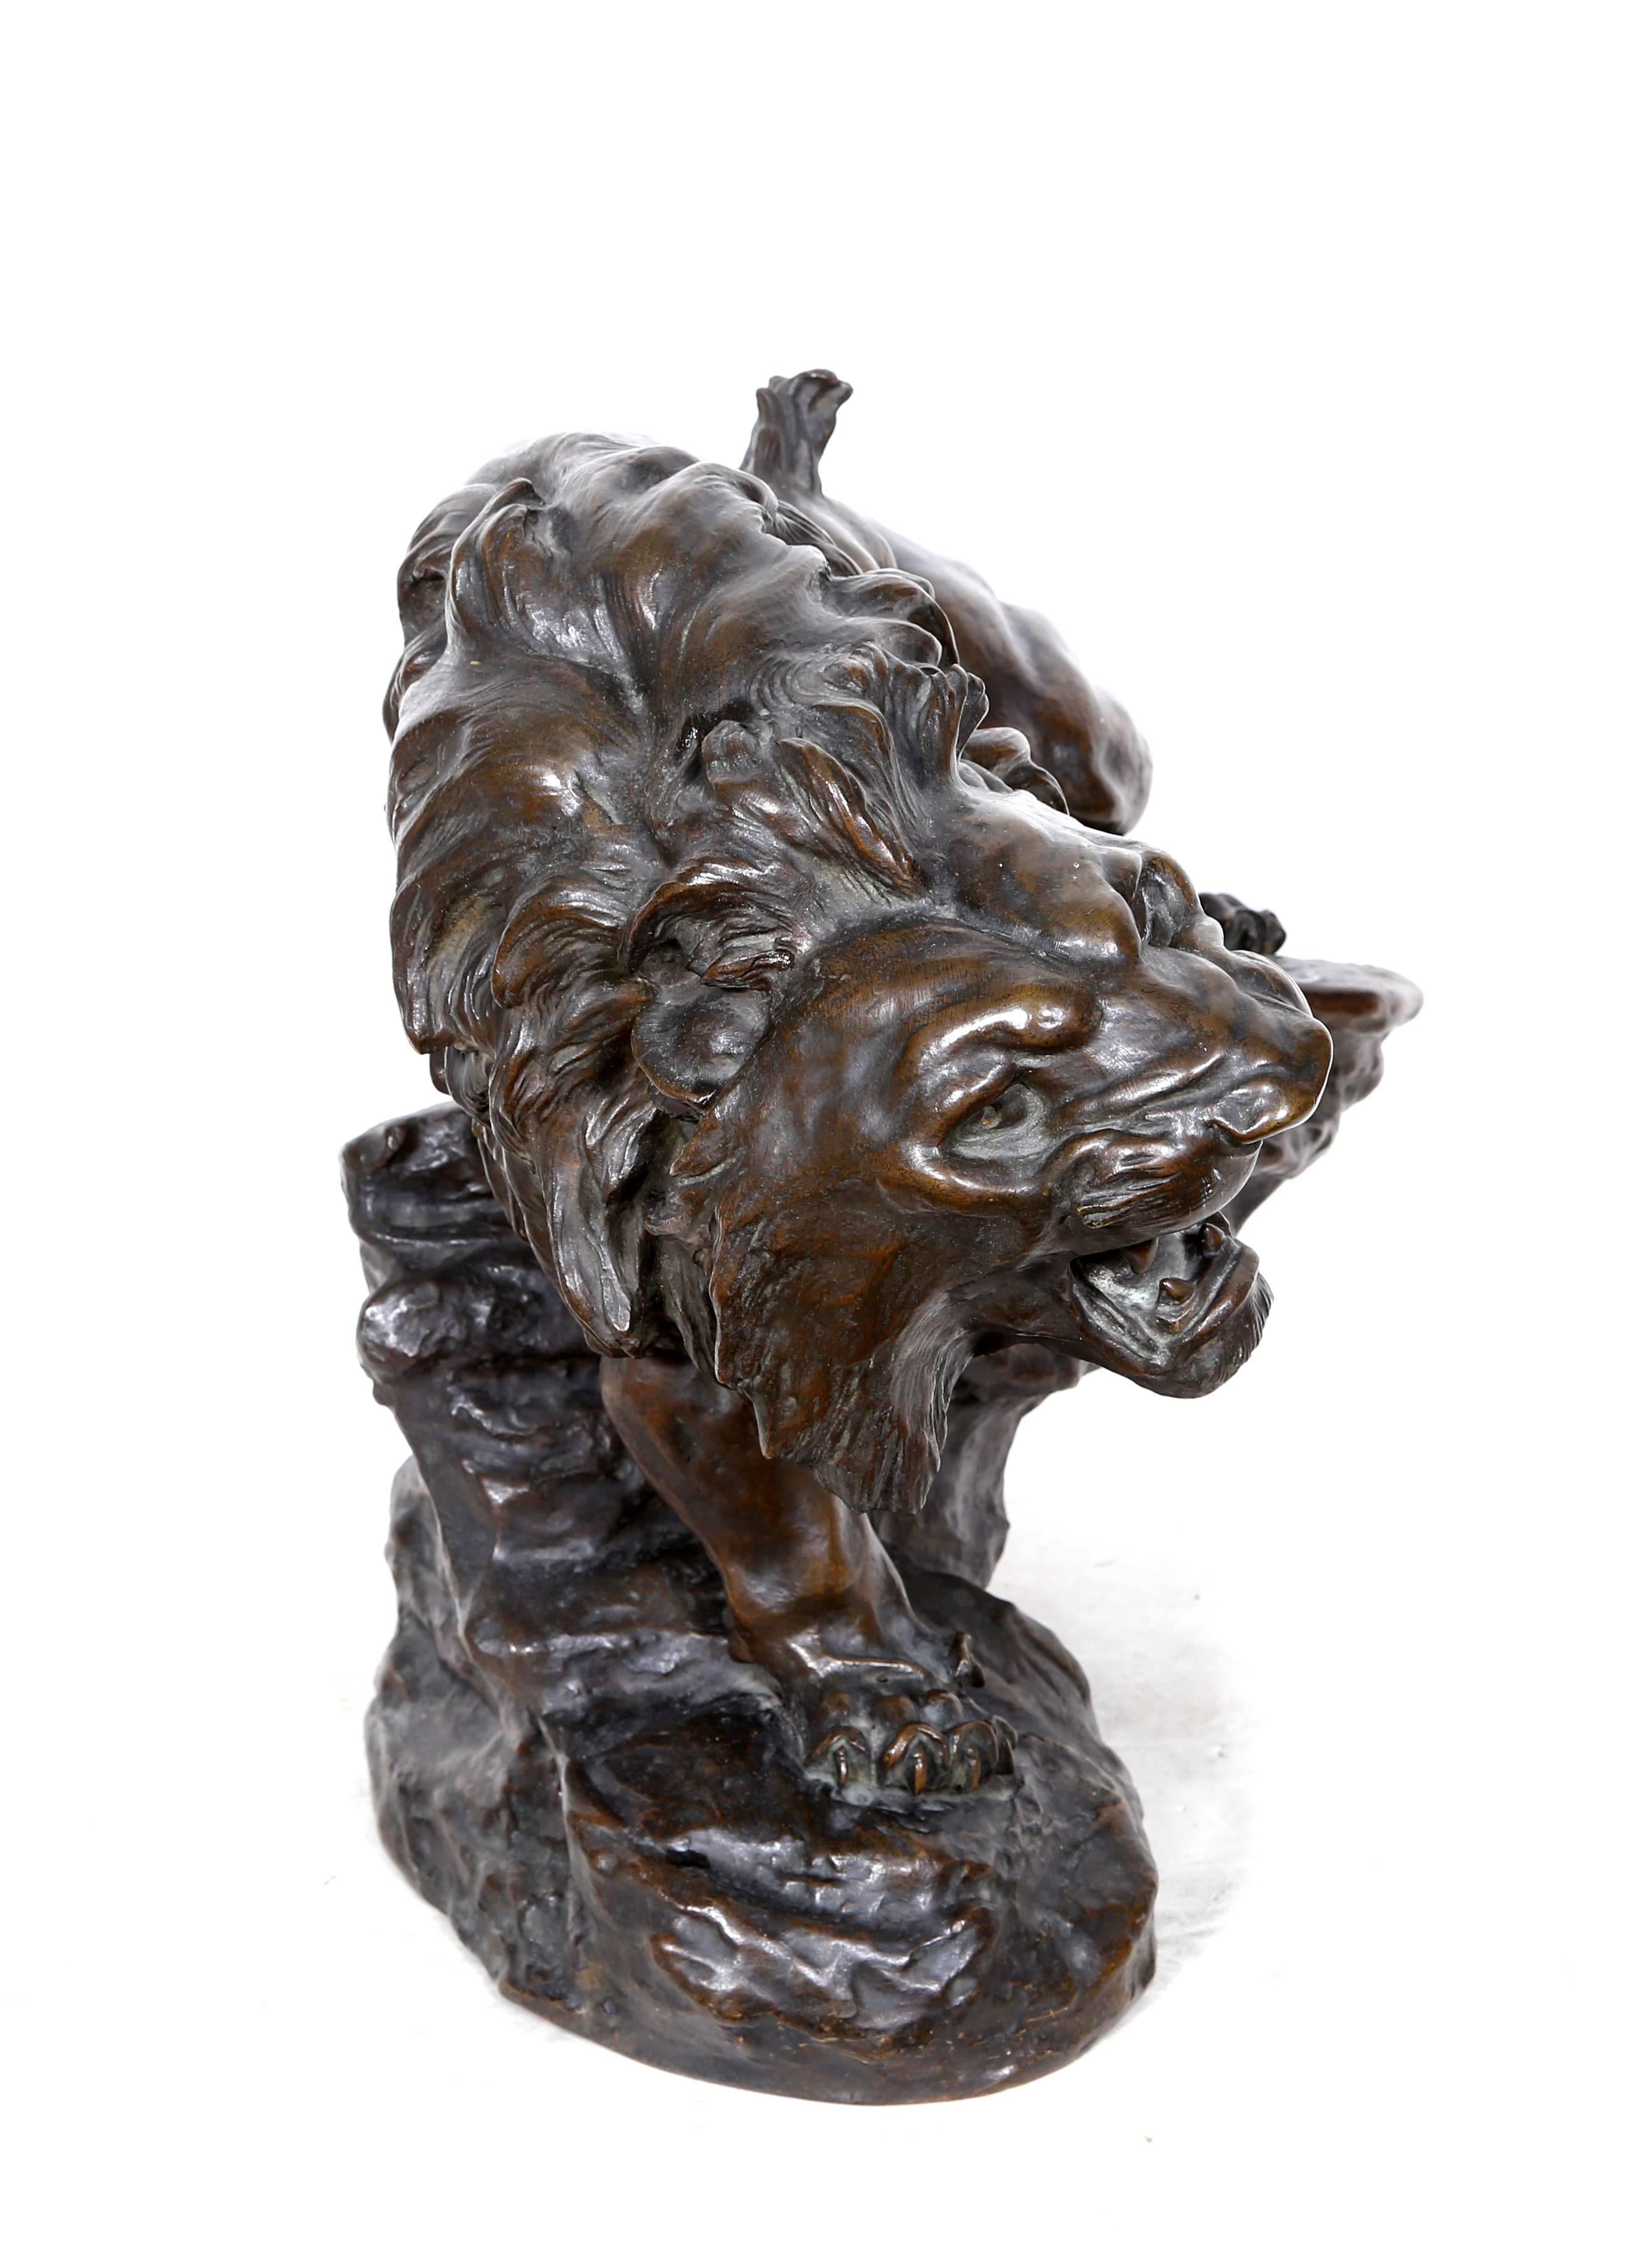 Artist: Thomas-Francois Cartier (After), French (1879 - 1943)
Title: Snarling Lion
Medium:	Bronze Sculpture, signature inscribed
Size:	17  x 18.5  x 13 in. (43.18  x 46.99  x 33.02 cm)